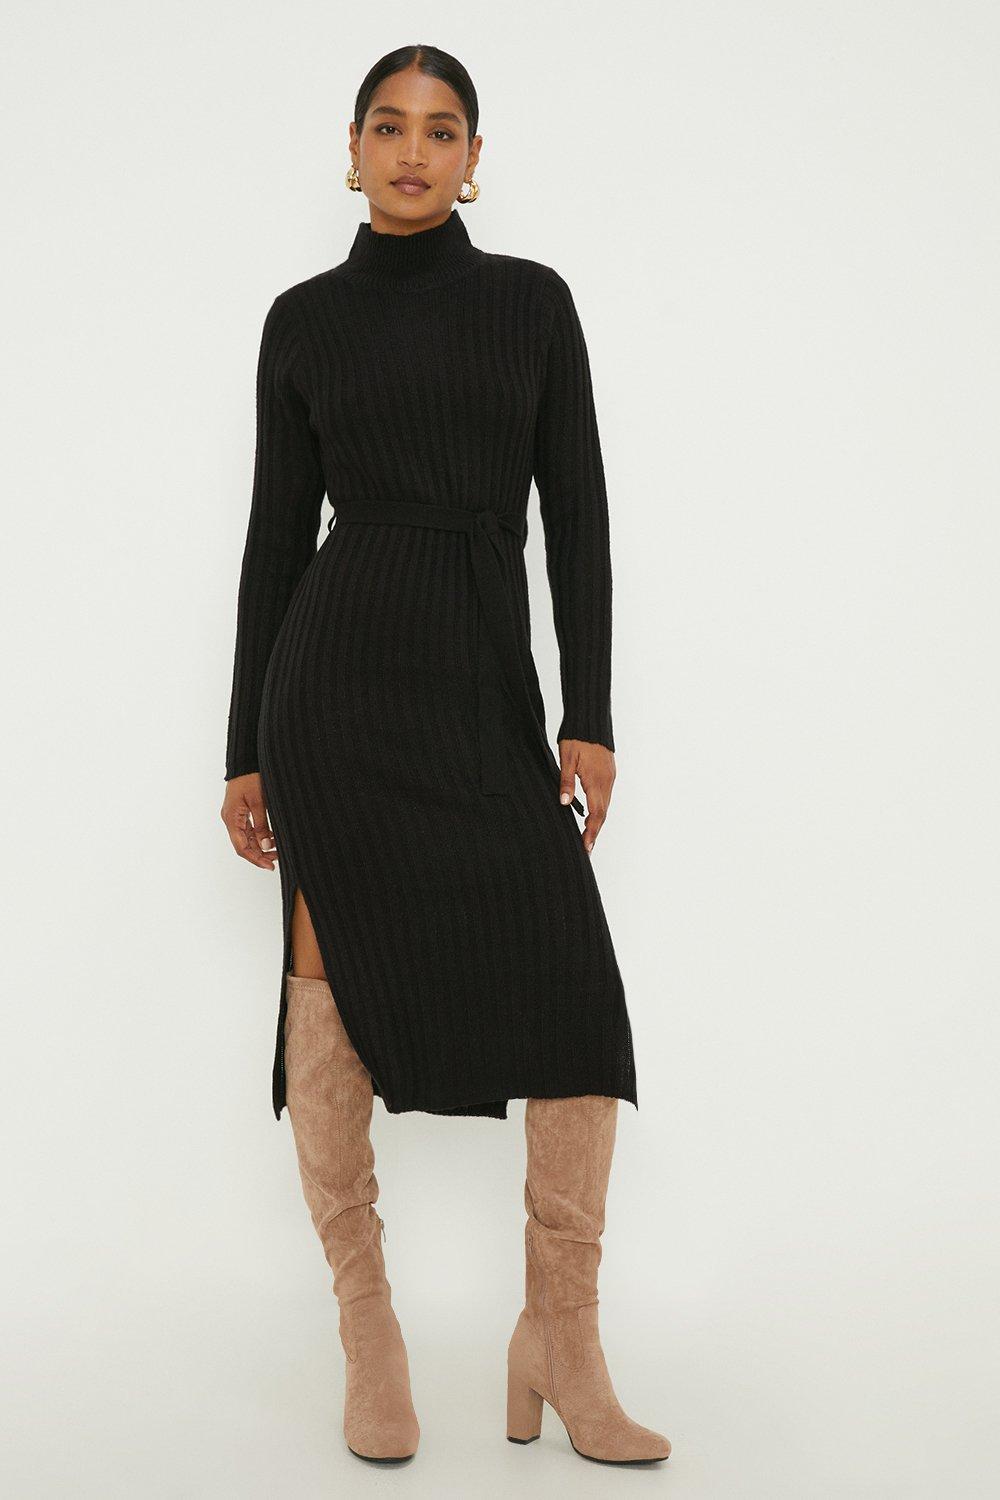 Women's Belted Ribbed Knitted Dress - black - M